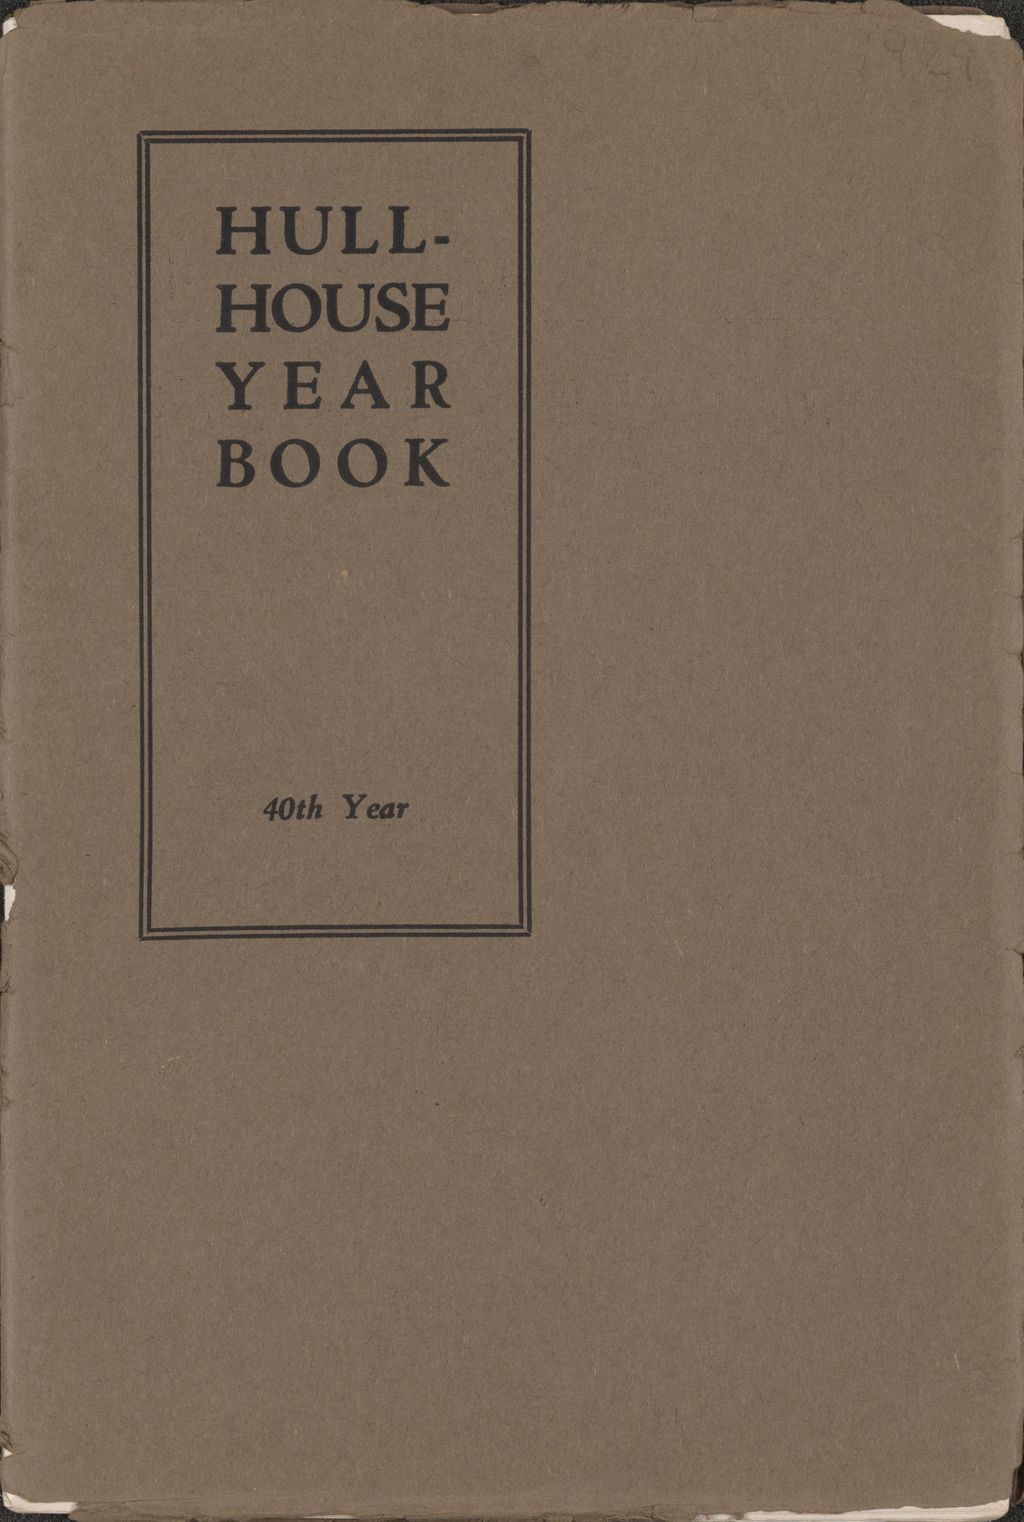 Miniature of Hull-House Year Book, 1927-1928